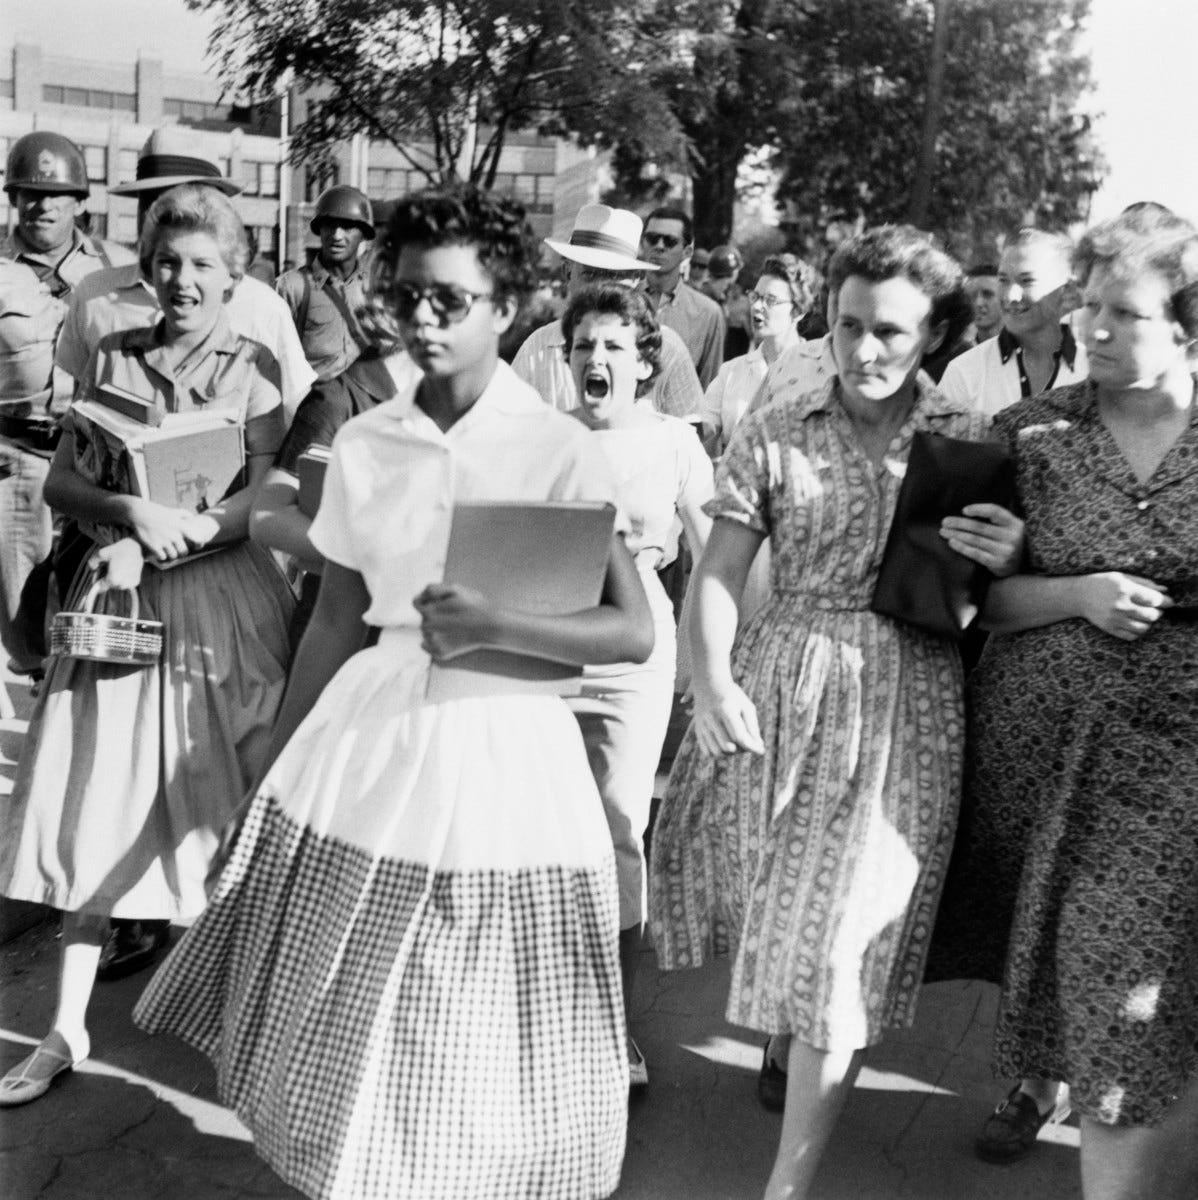 The Story Behind the Famous Little Rock Nine &#39;Scream Image&#39; - HISTORY